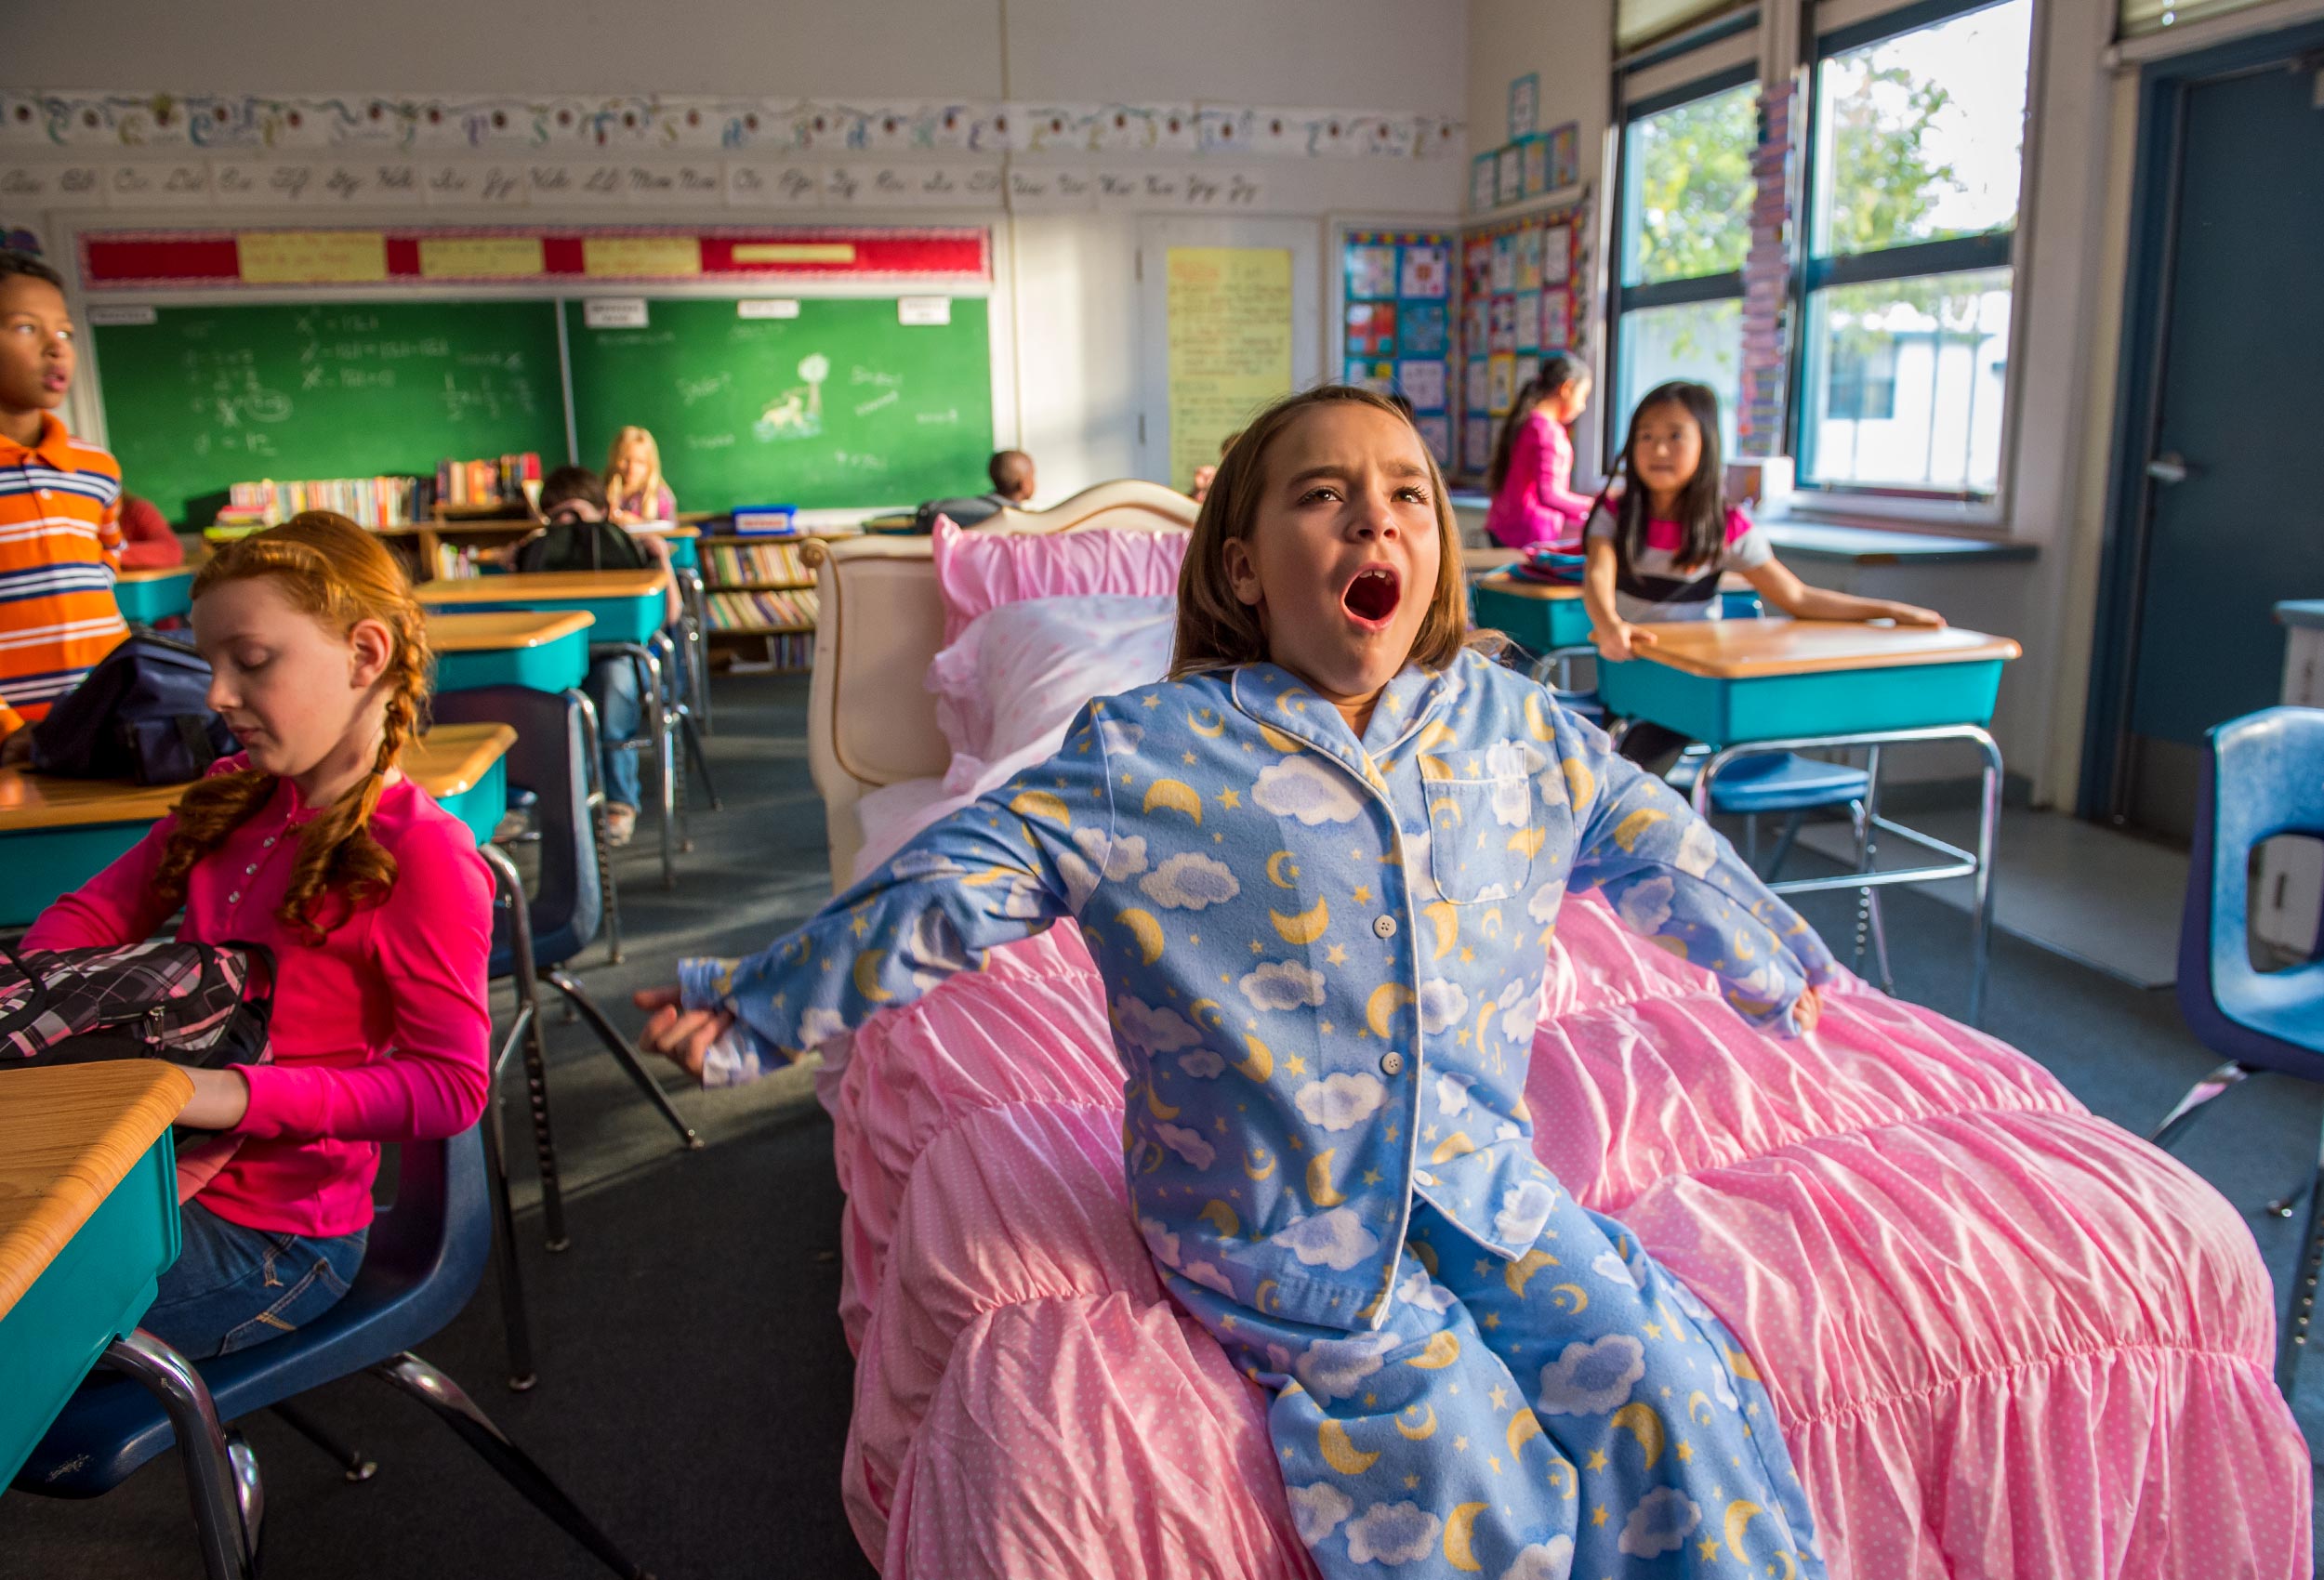 Young girl wearing pajamas sits on bed yawning in school room from Children